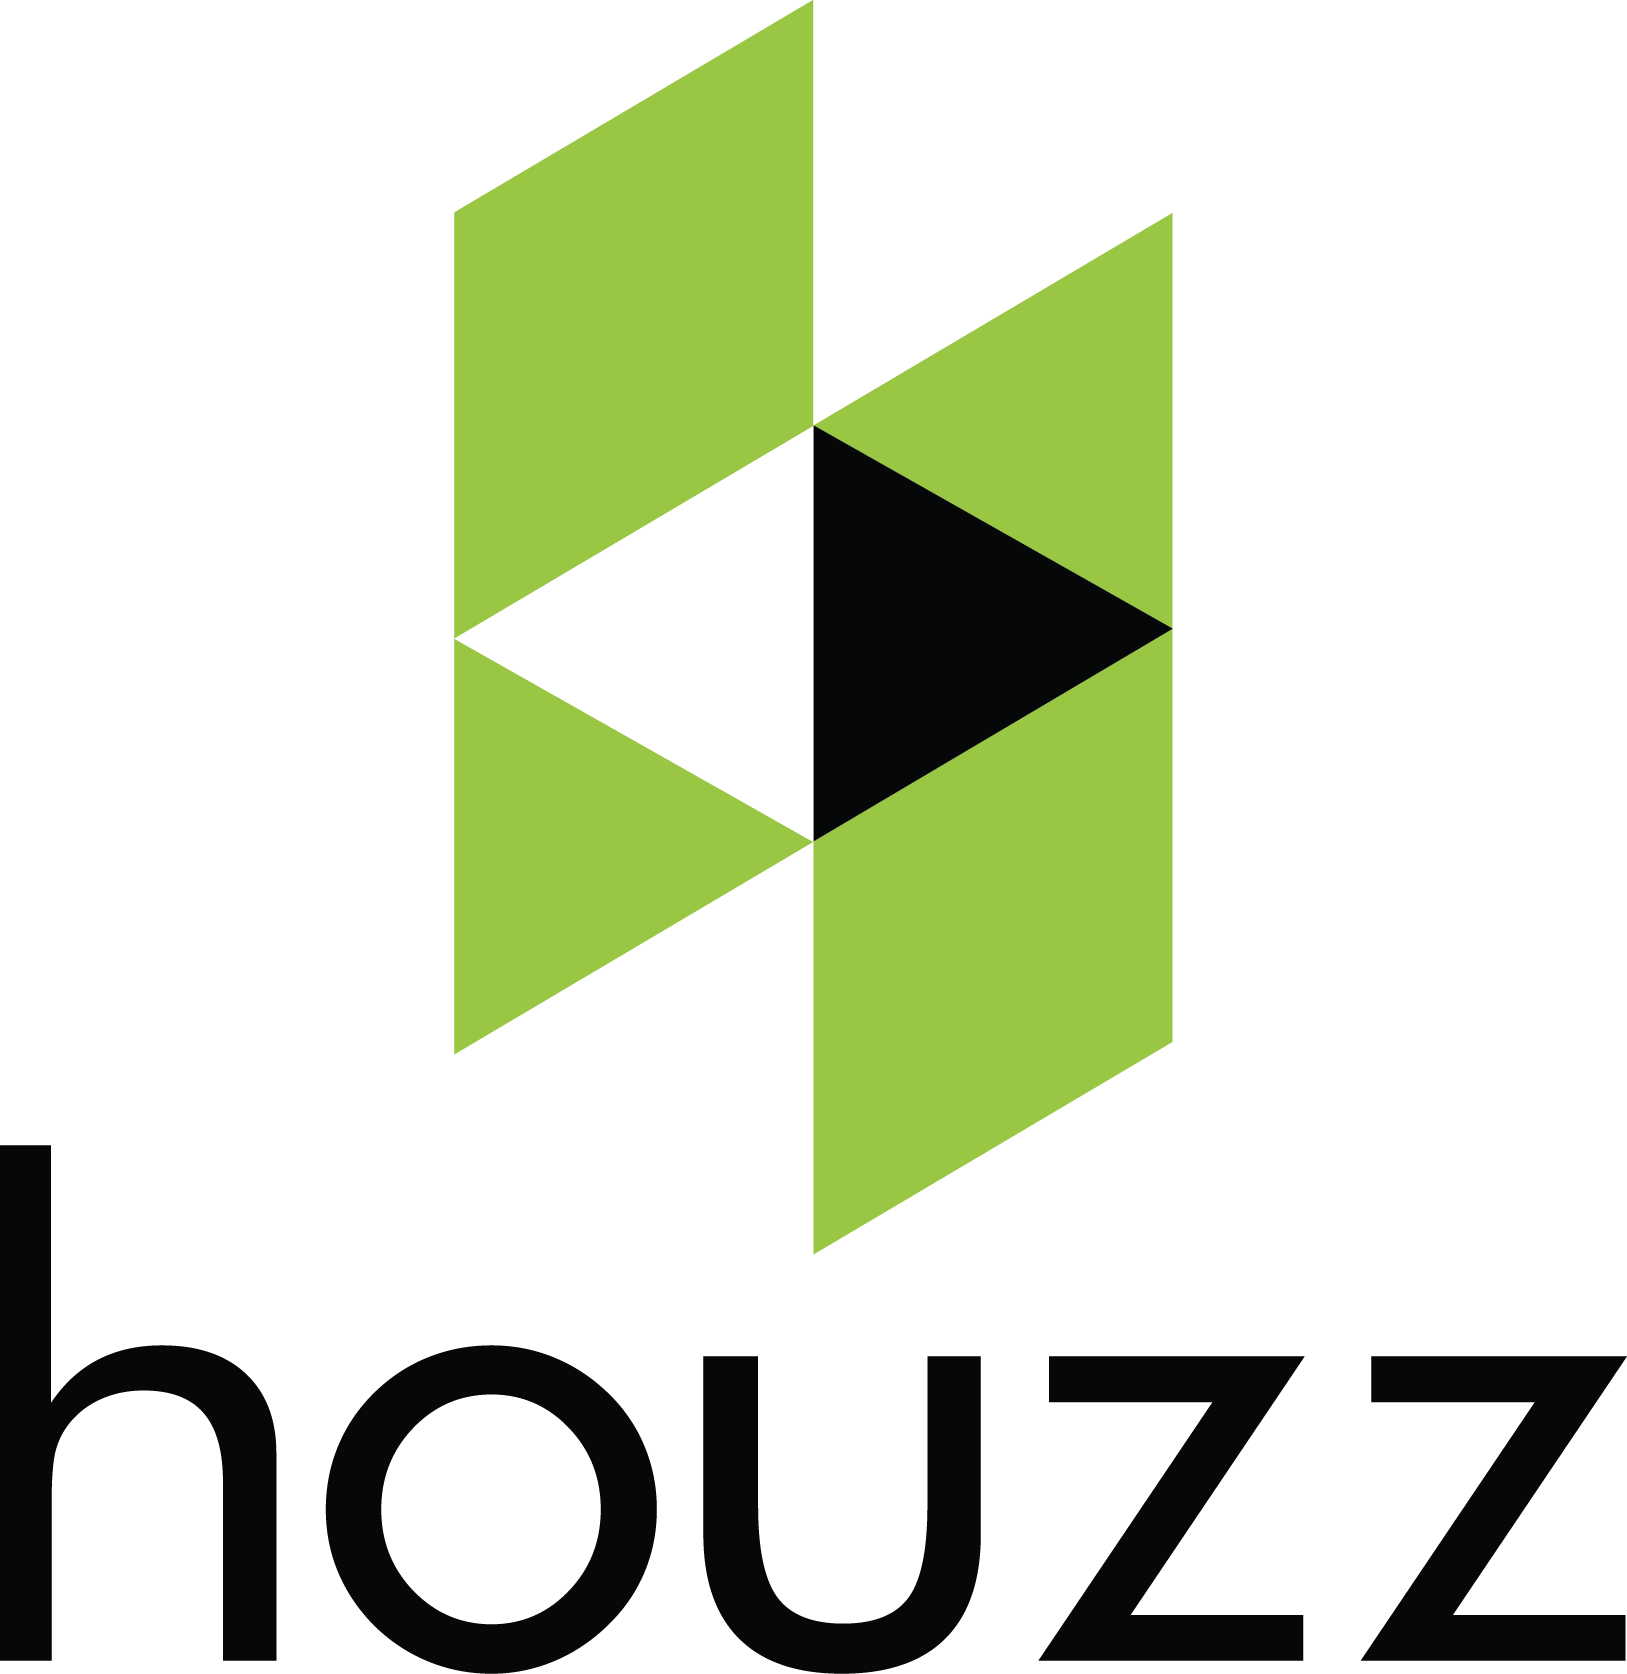 Home Remodeling Trumps Moving, Houzz Survey Finds